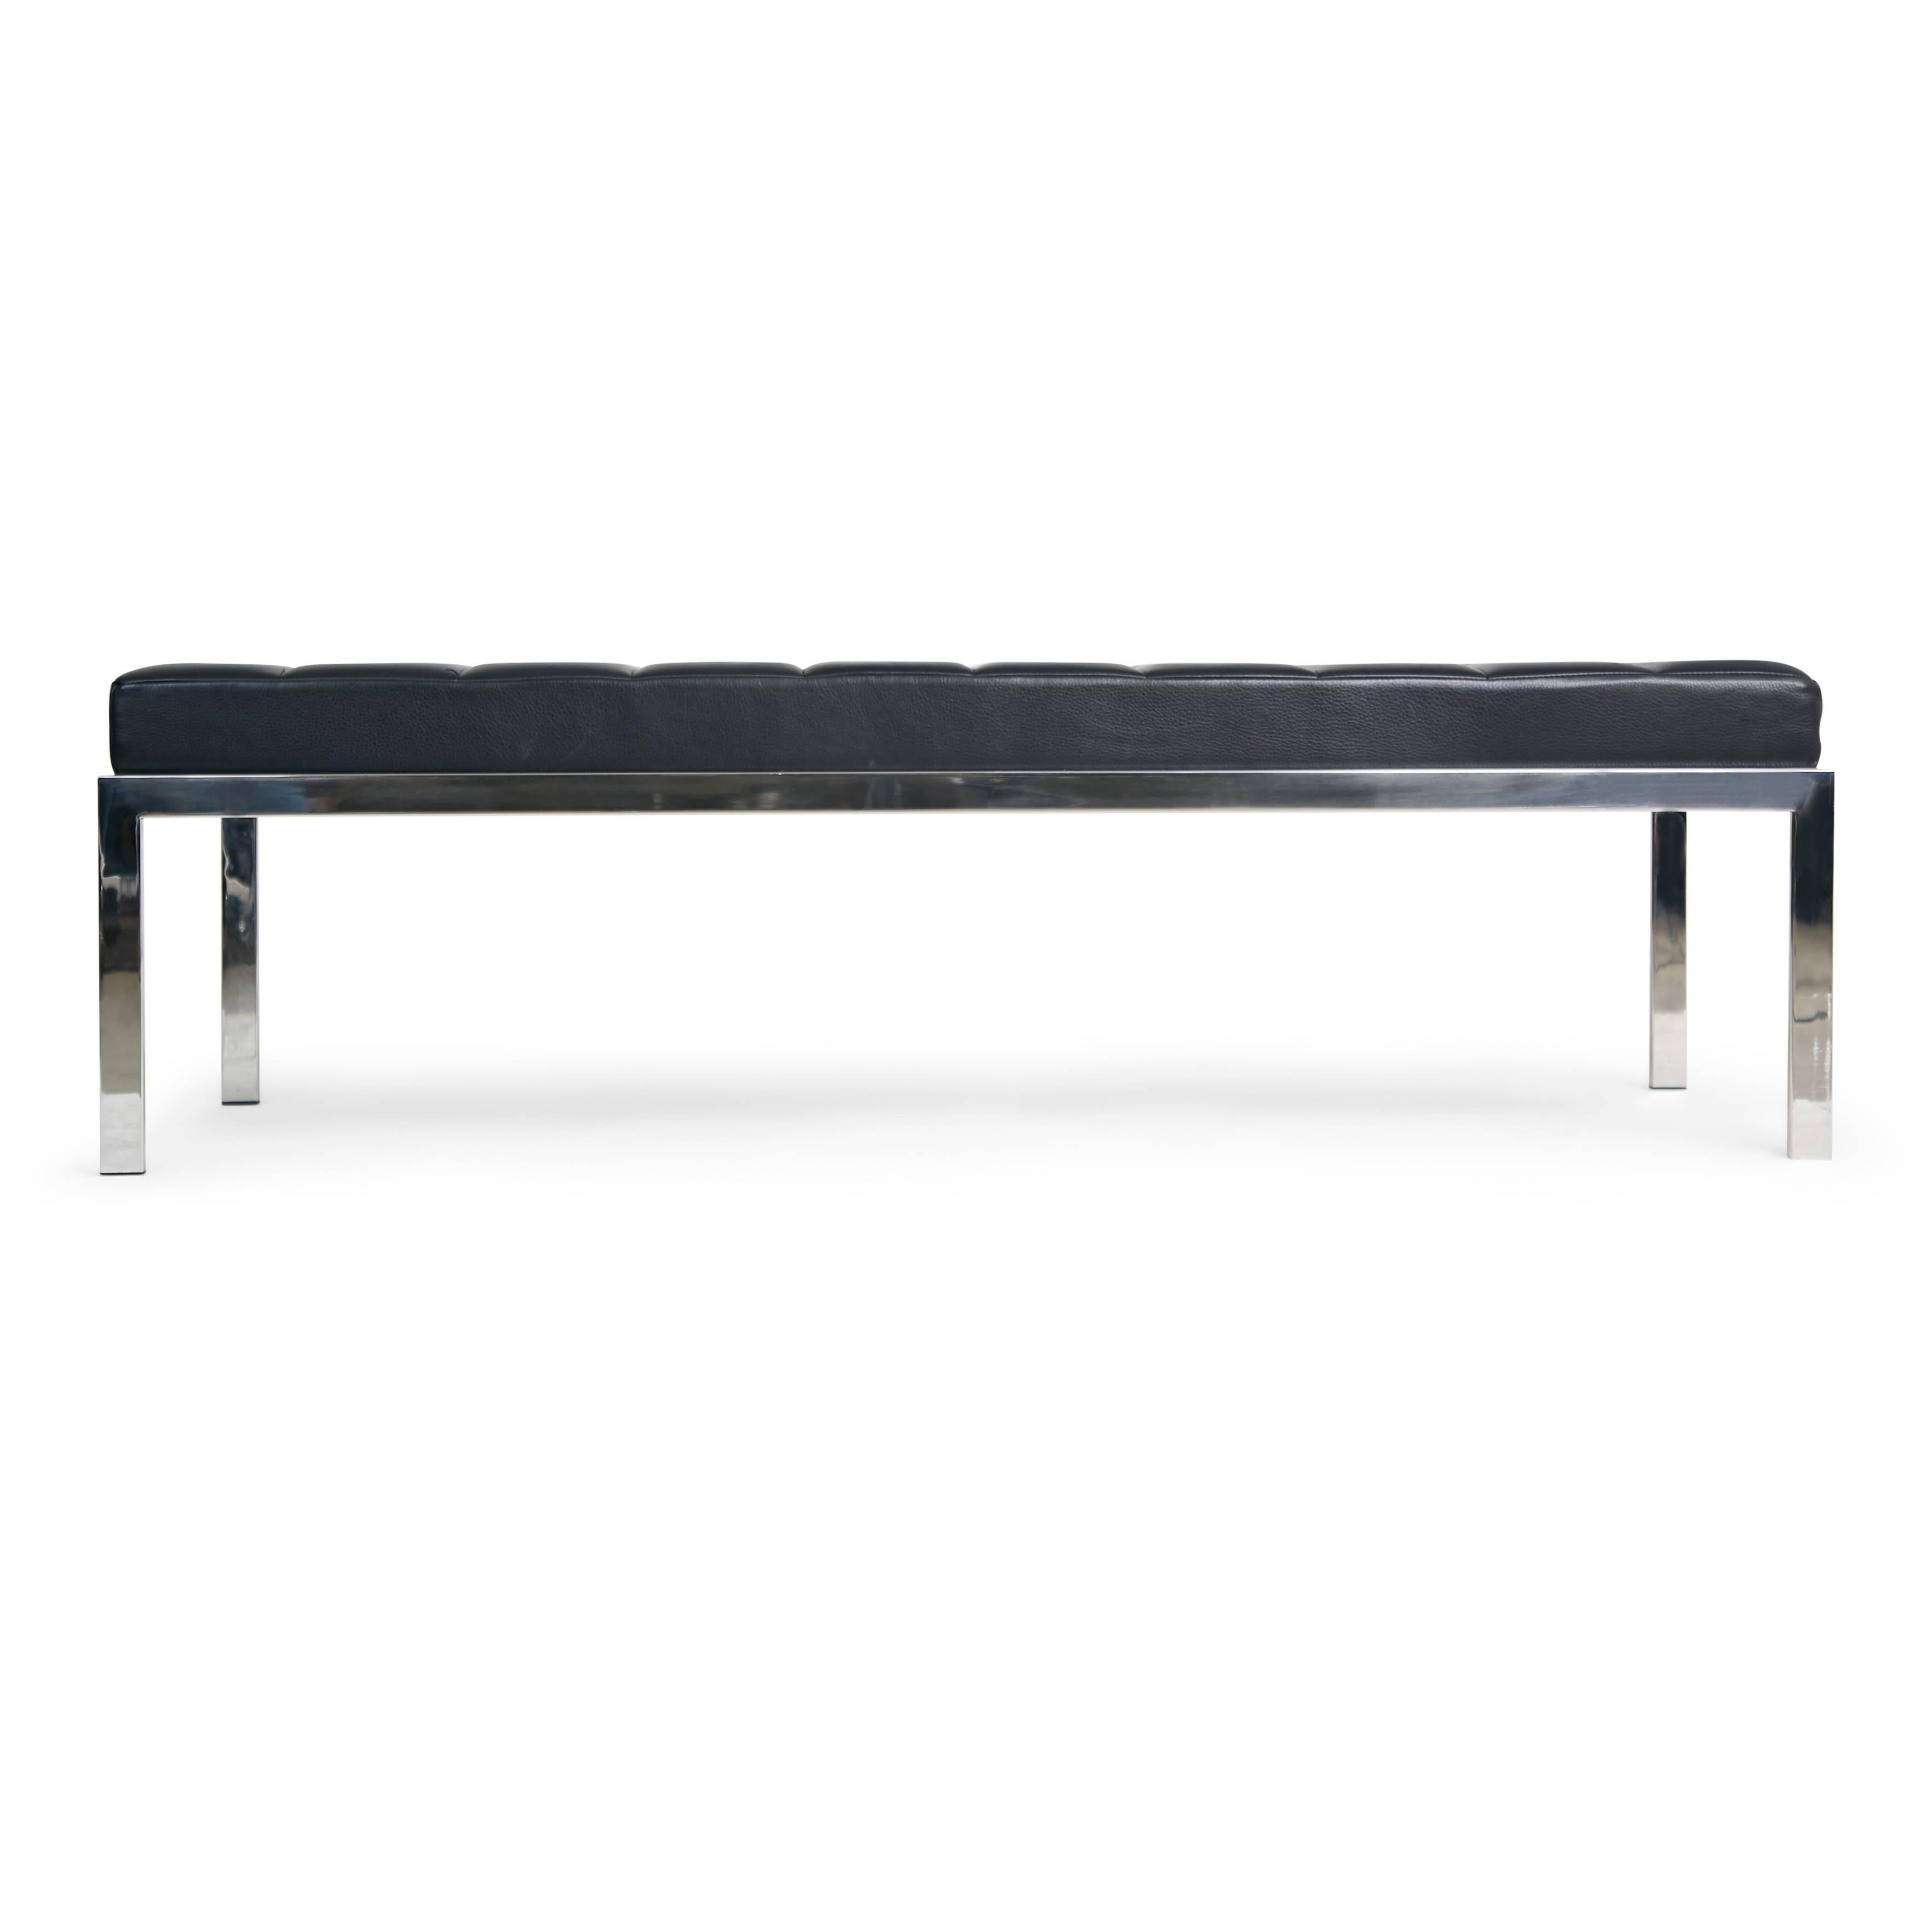 American Modern Black Leather and Chromed Steel Bench from Tribune Towers, circa 1990